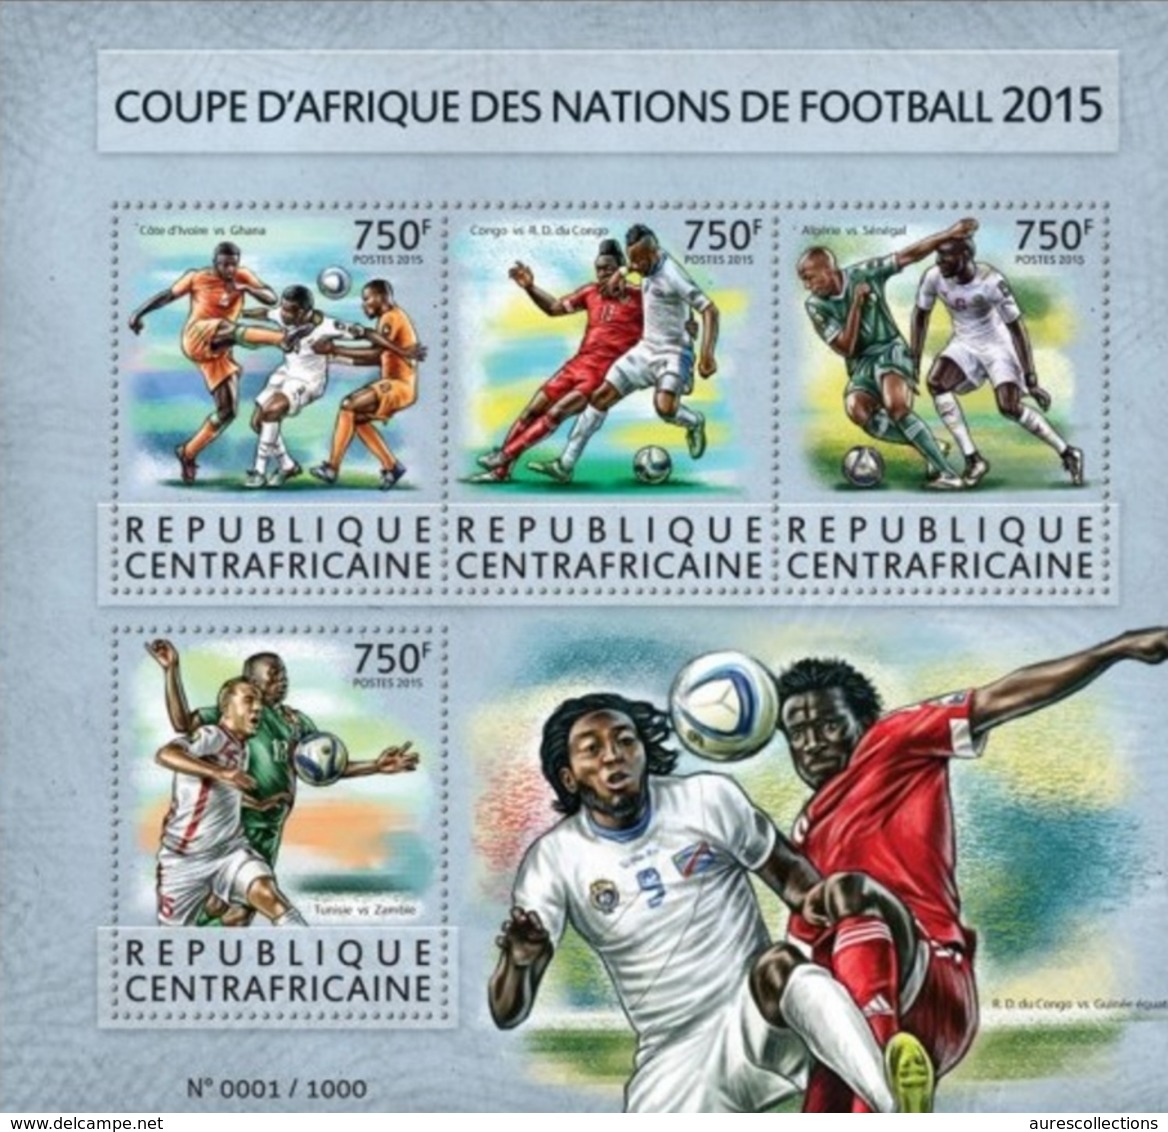 ¤¤ ALGERIA IN STAMPS ¤¤ CENTRAL AFRICAN REPUBLIC CENTRAFRICAINE 2015 AFRICA SOCCER FOOTBALL CUP SHEET BLOC BLOCK  MNH - Non Classés